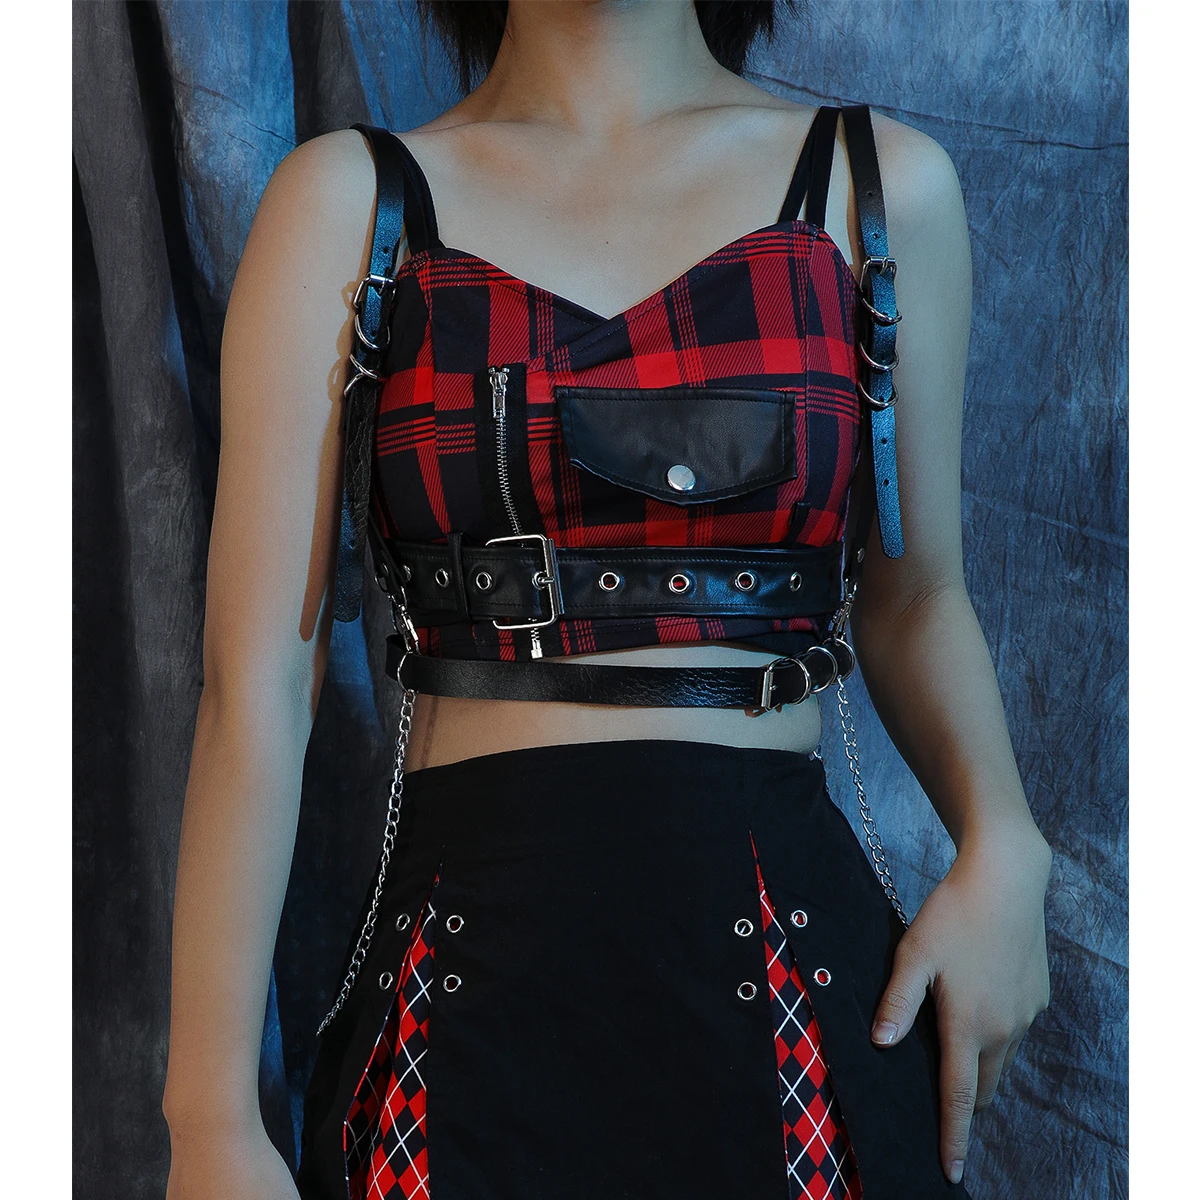 Gothic Women Pu Leather Belt With Chain Hiphop Sexy Body Harness Adjustable Waist Belt Set Dress Jeans Accessories Harajuku New